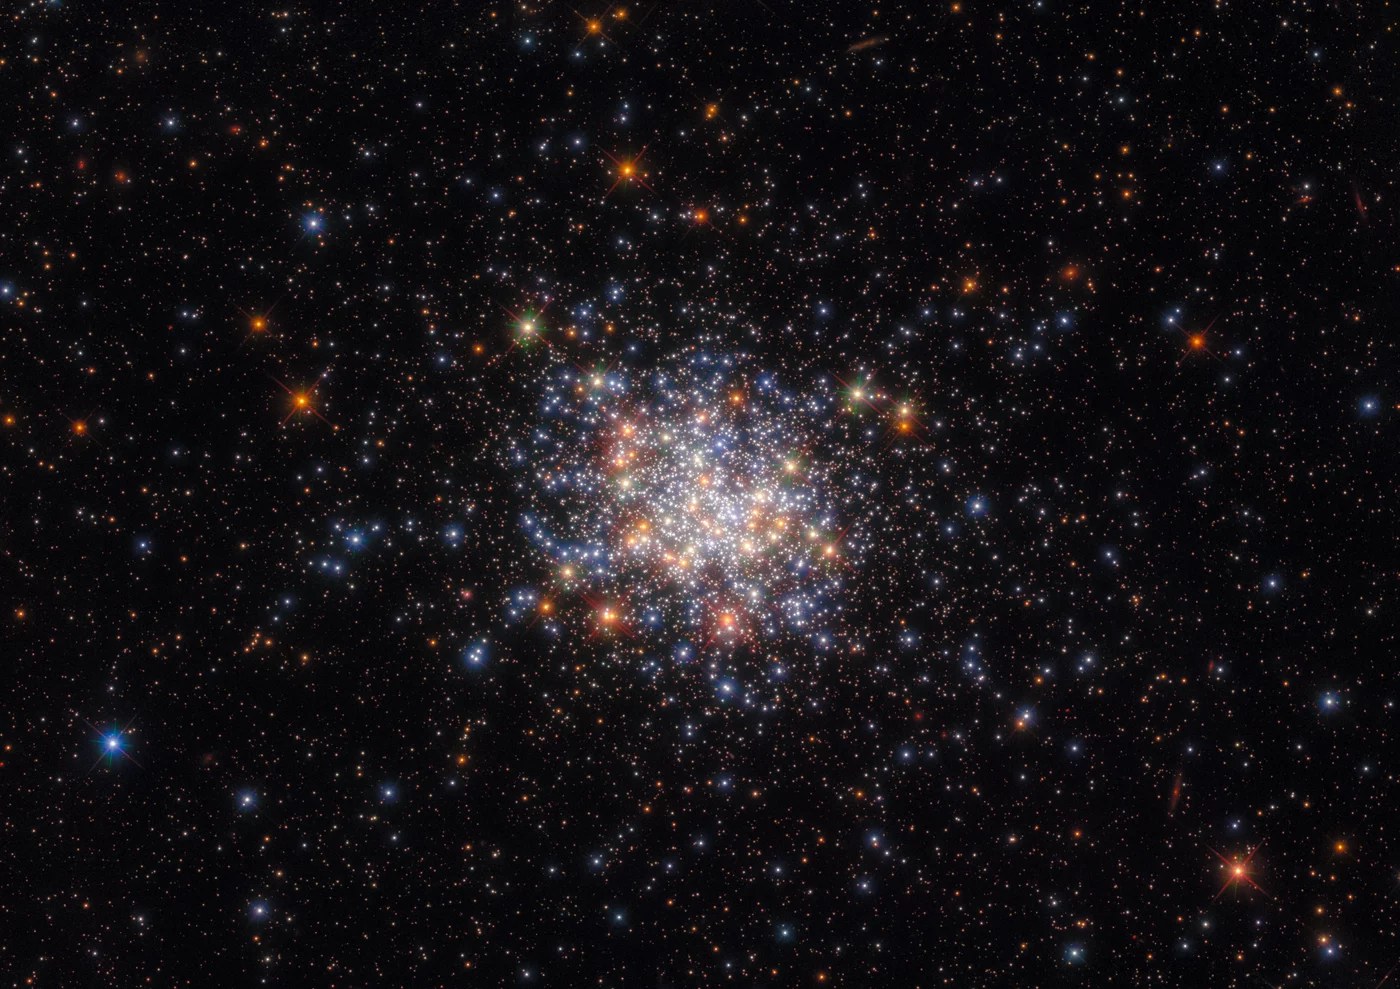 The open star cluster NGC 1755